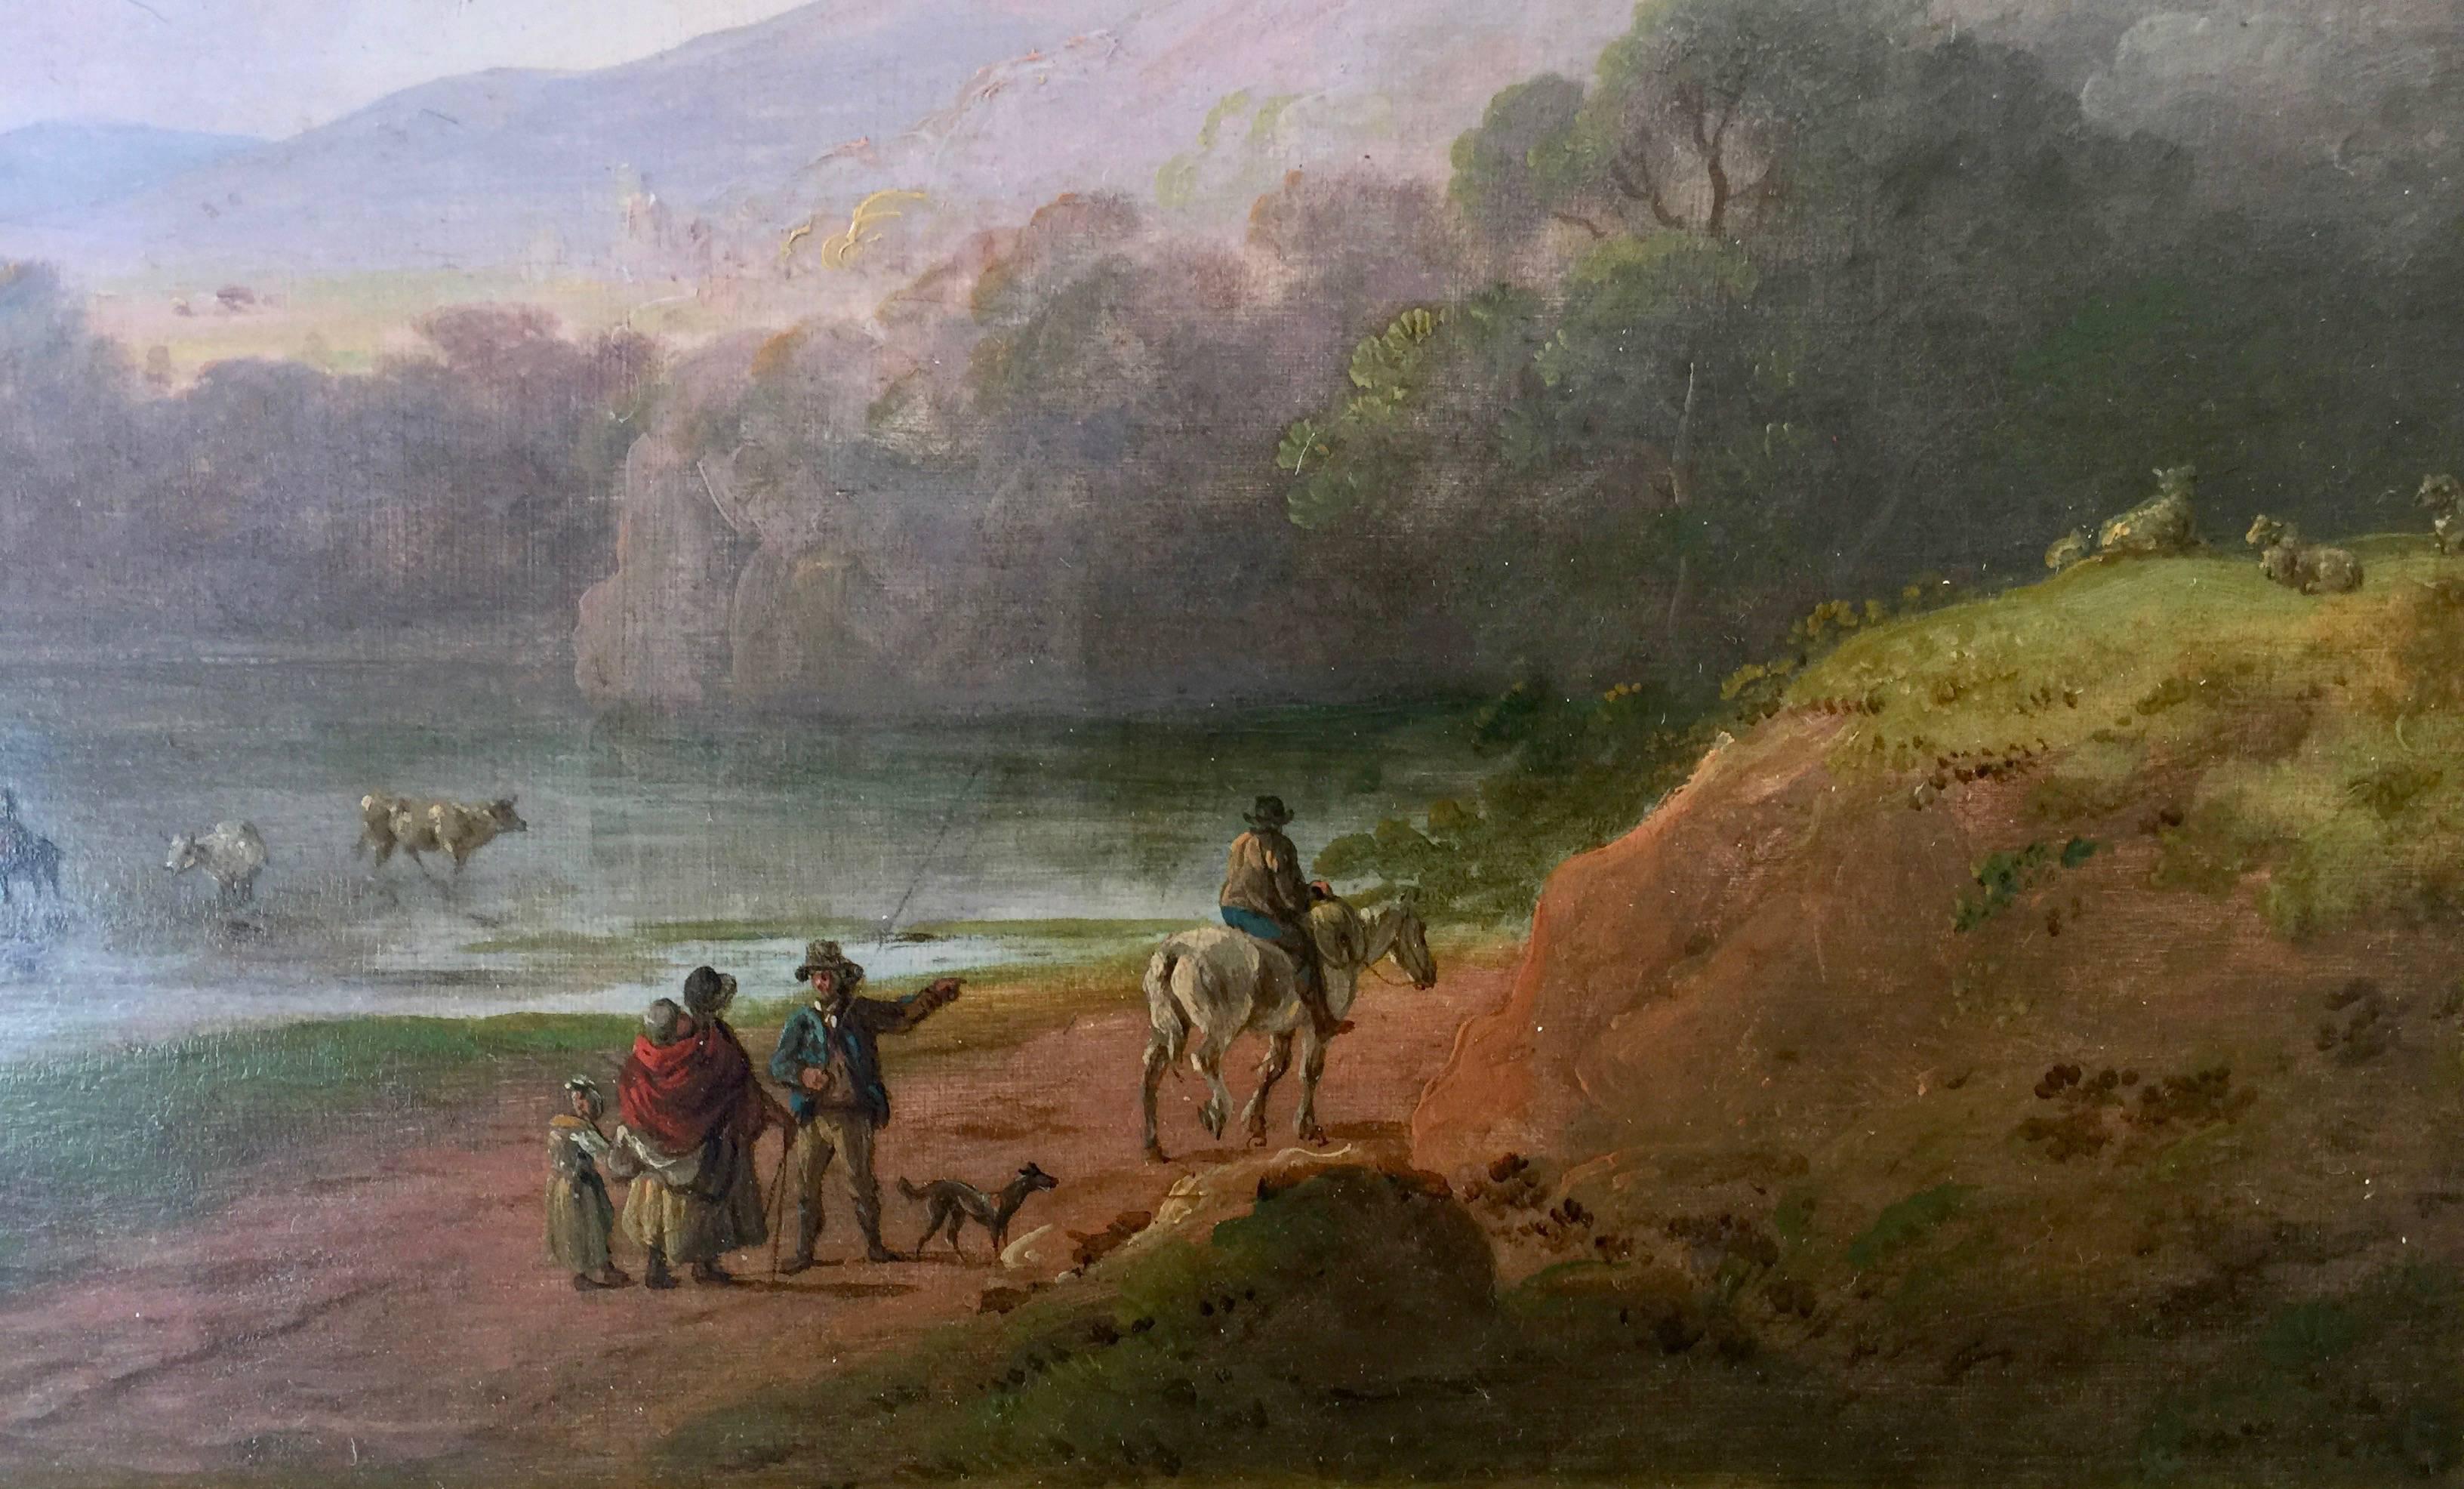 Antique 18C English landscape with figures on a pathway with horses and dogs - Painting by Julius Caesar ibbetson